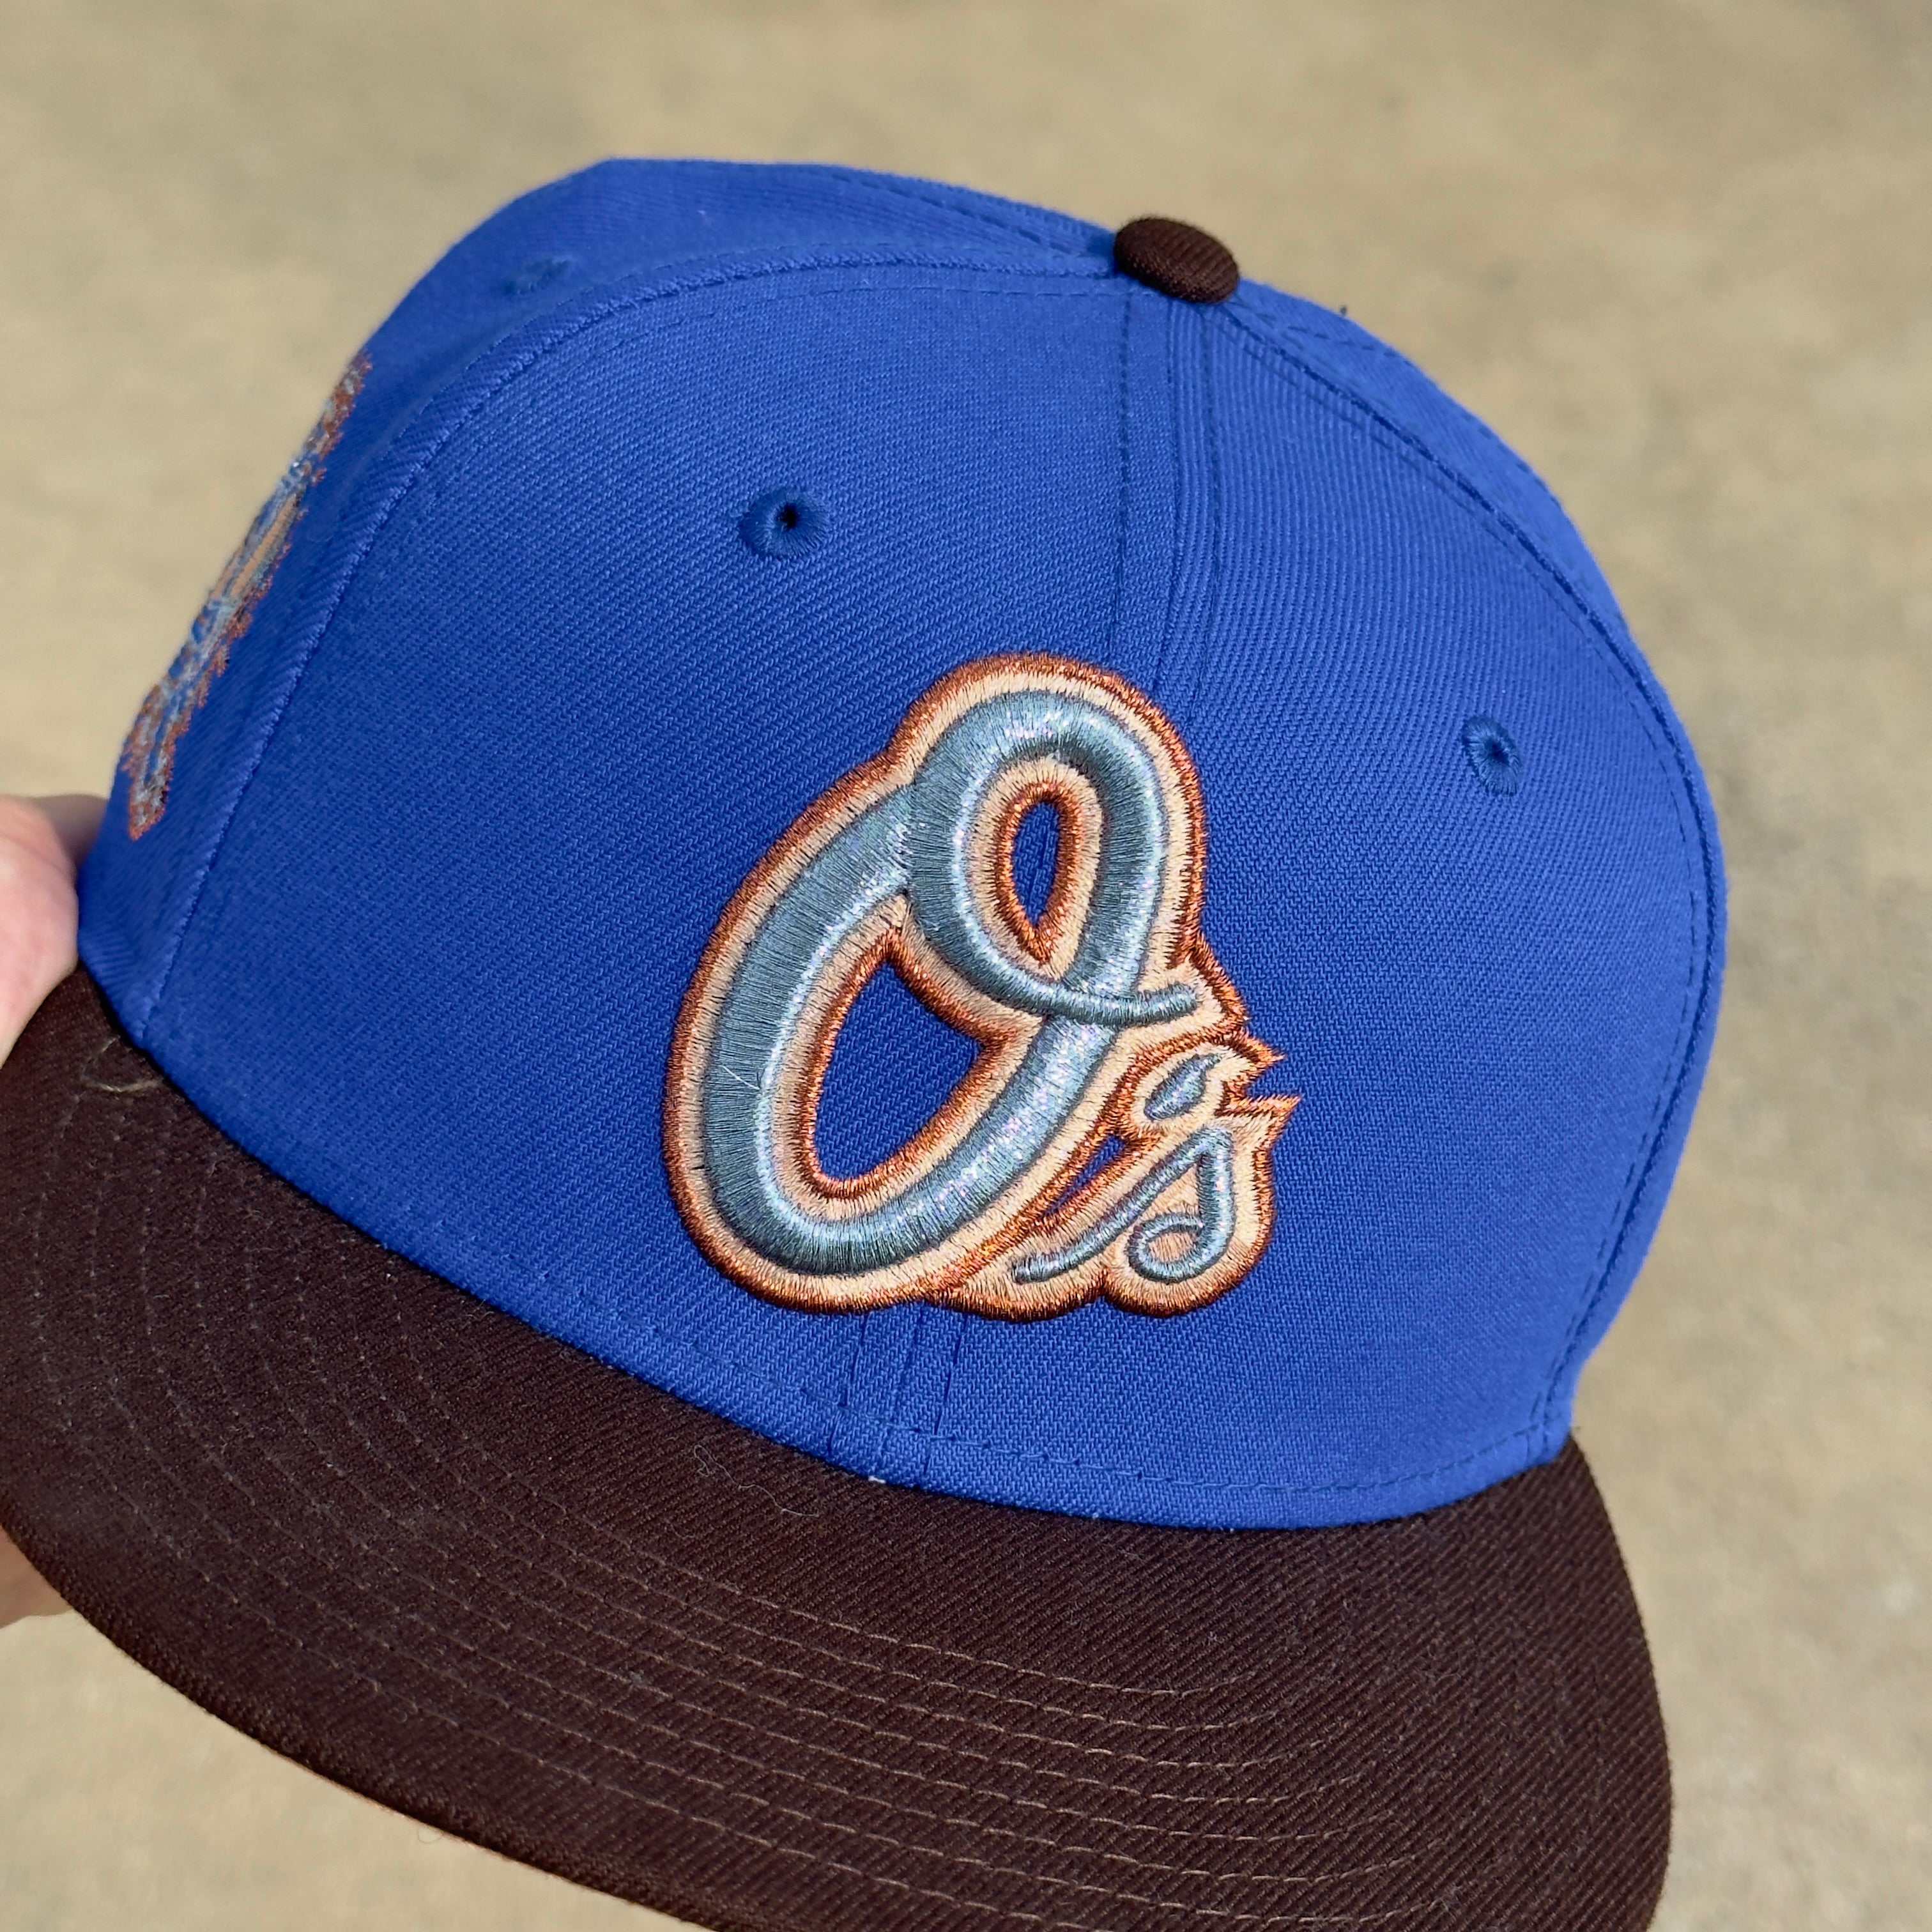 1/8 USED Blue Baltimore Orioles 50th Anniversary 59fifty New Era Fitted Hat Cap